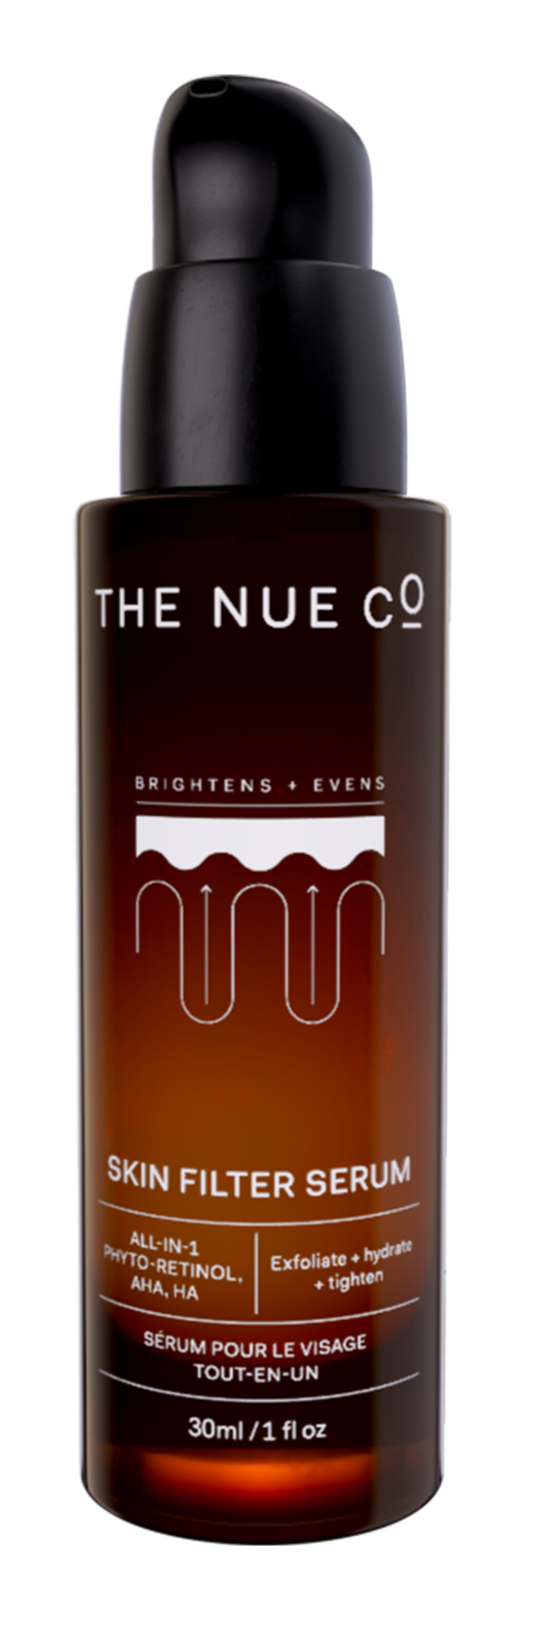 The Nue Co Skin Filter Serum